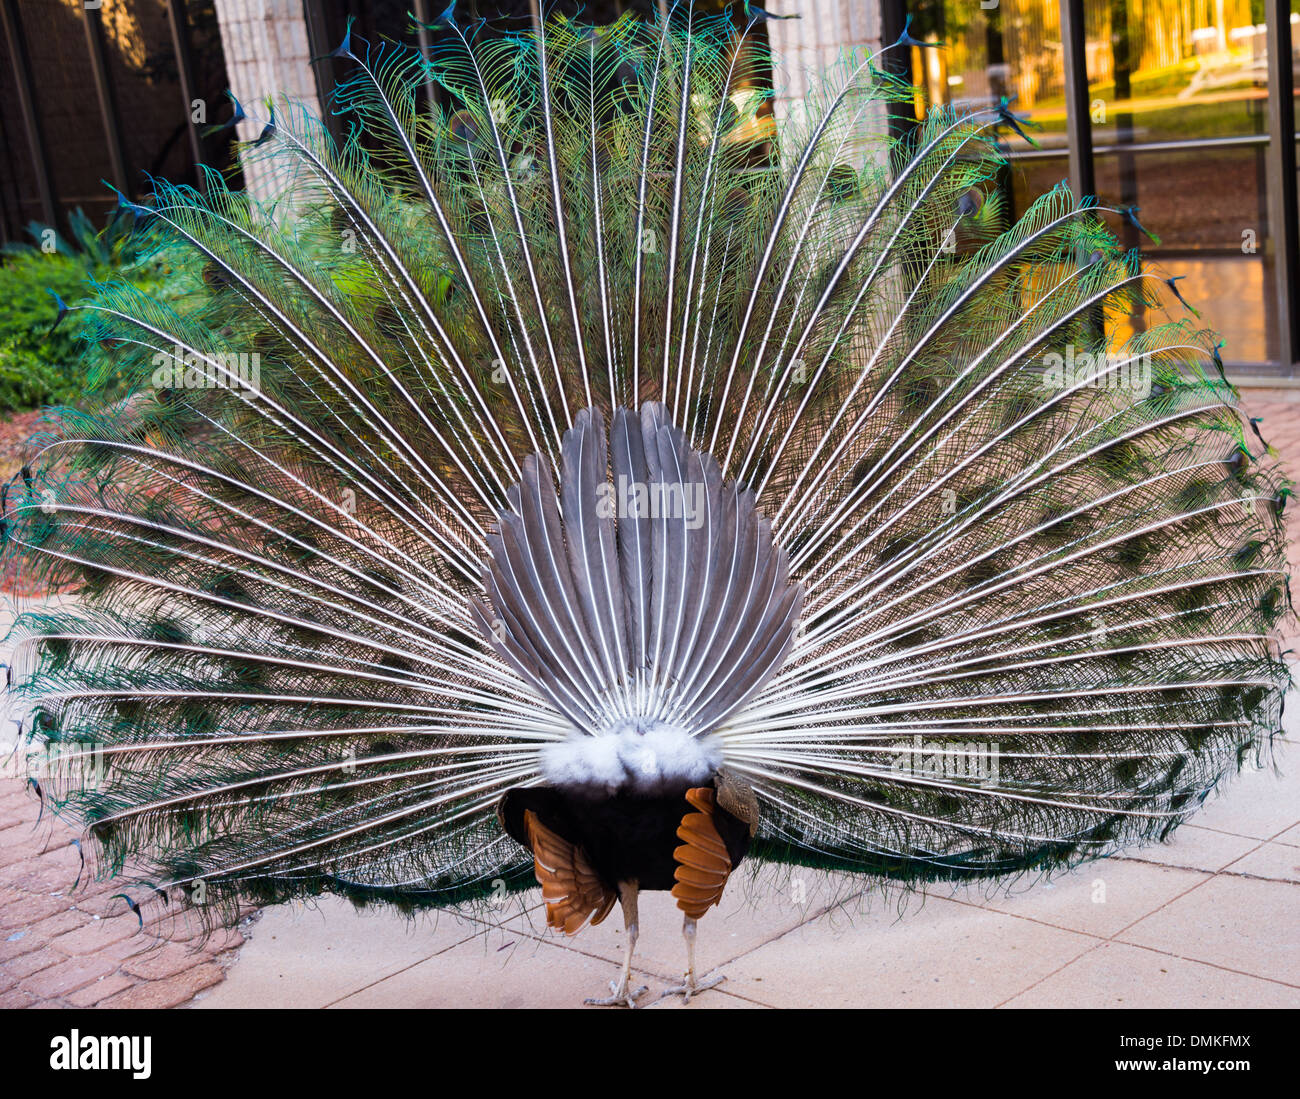 rear feathers of a peacock lyrebird back view in series Stock Photo